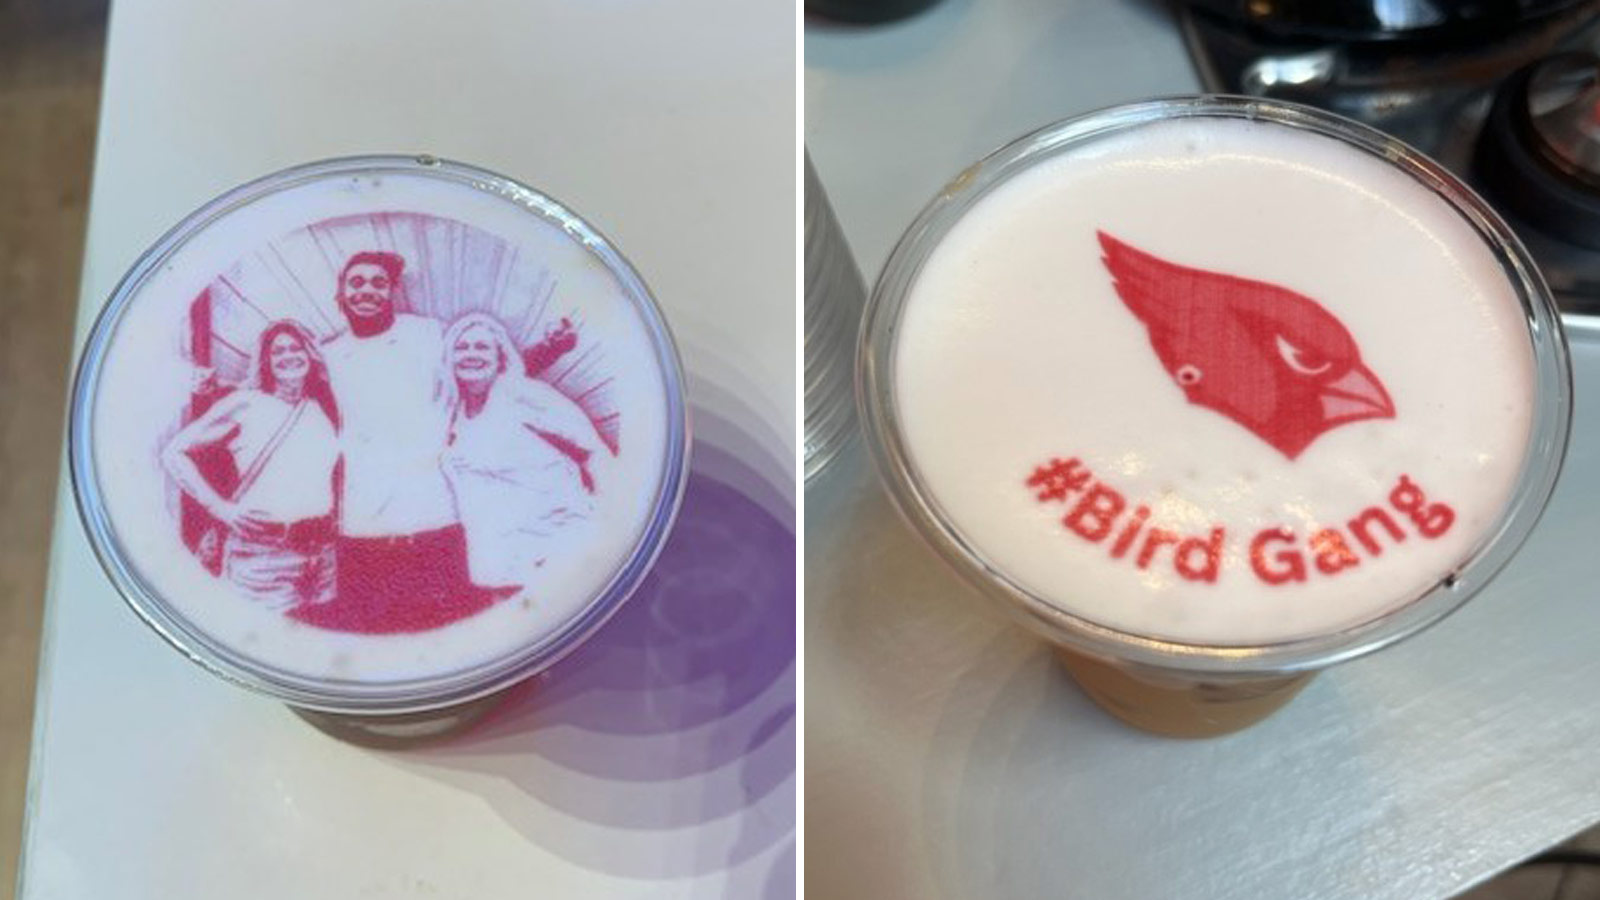 Fans can add edible images and messages to coffee or beer foam at Arizona Cardinals home games in t...